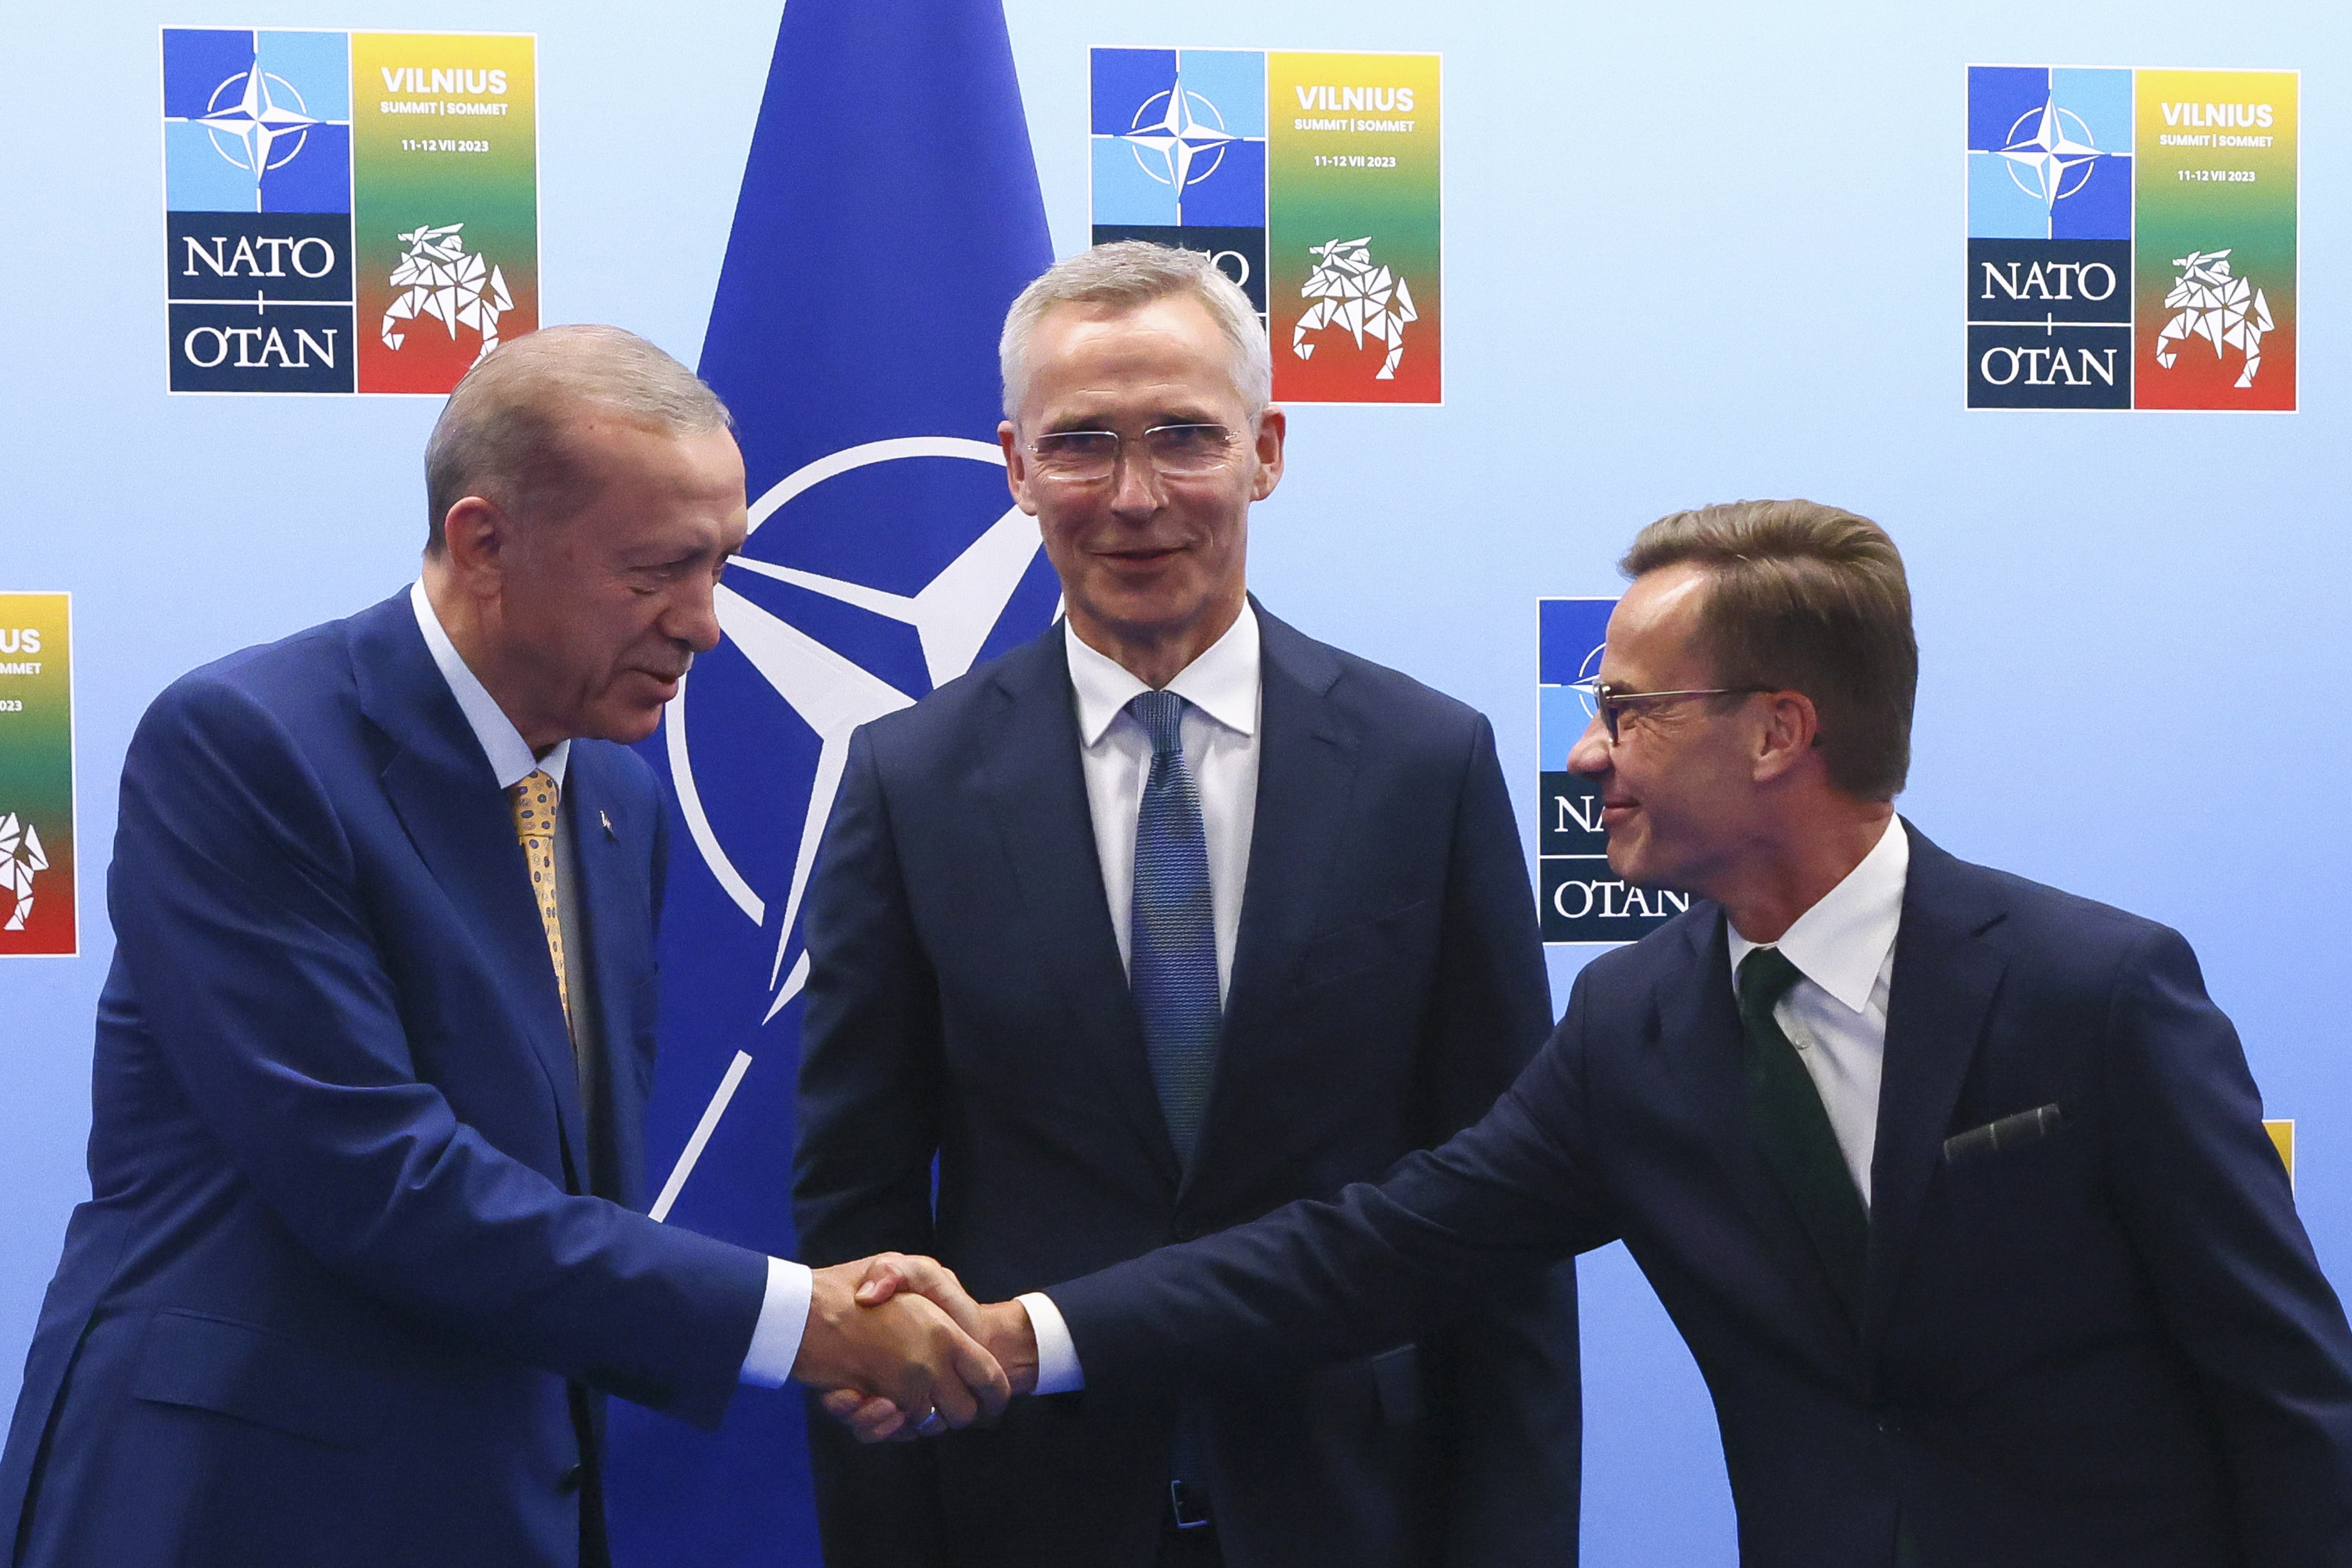 Turkey’s President Recep Tayyip Erdogan, left, shakes hands with Sweden’s Prime Minister Ulf Kristersson, right, as Nato chief Jens Stoltenberg looks on in Vilnius, Lithuania on Monday, Photo: Pool Photo via AP